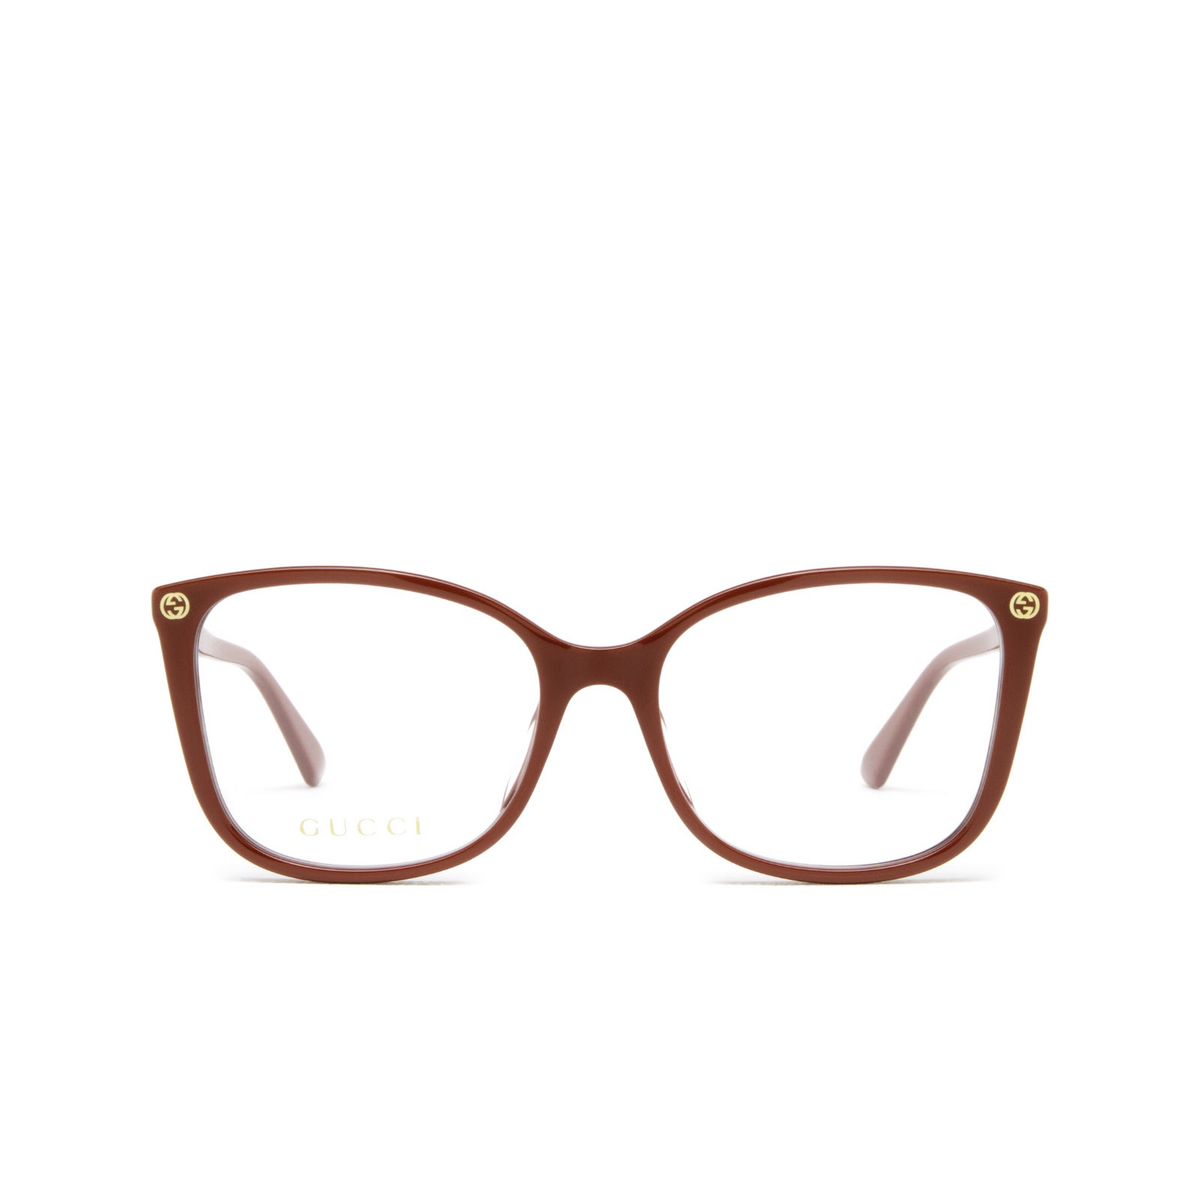 Gucci® Cat-eye Eyeglasses: GG0026O color Red 010 - front view.